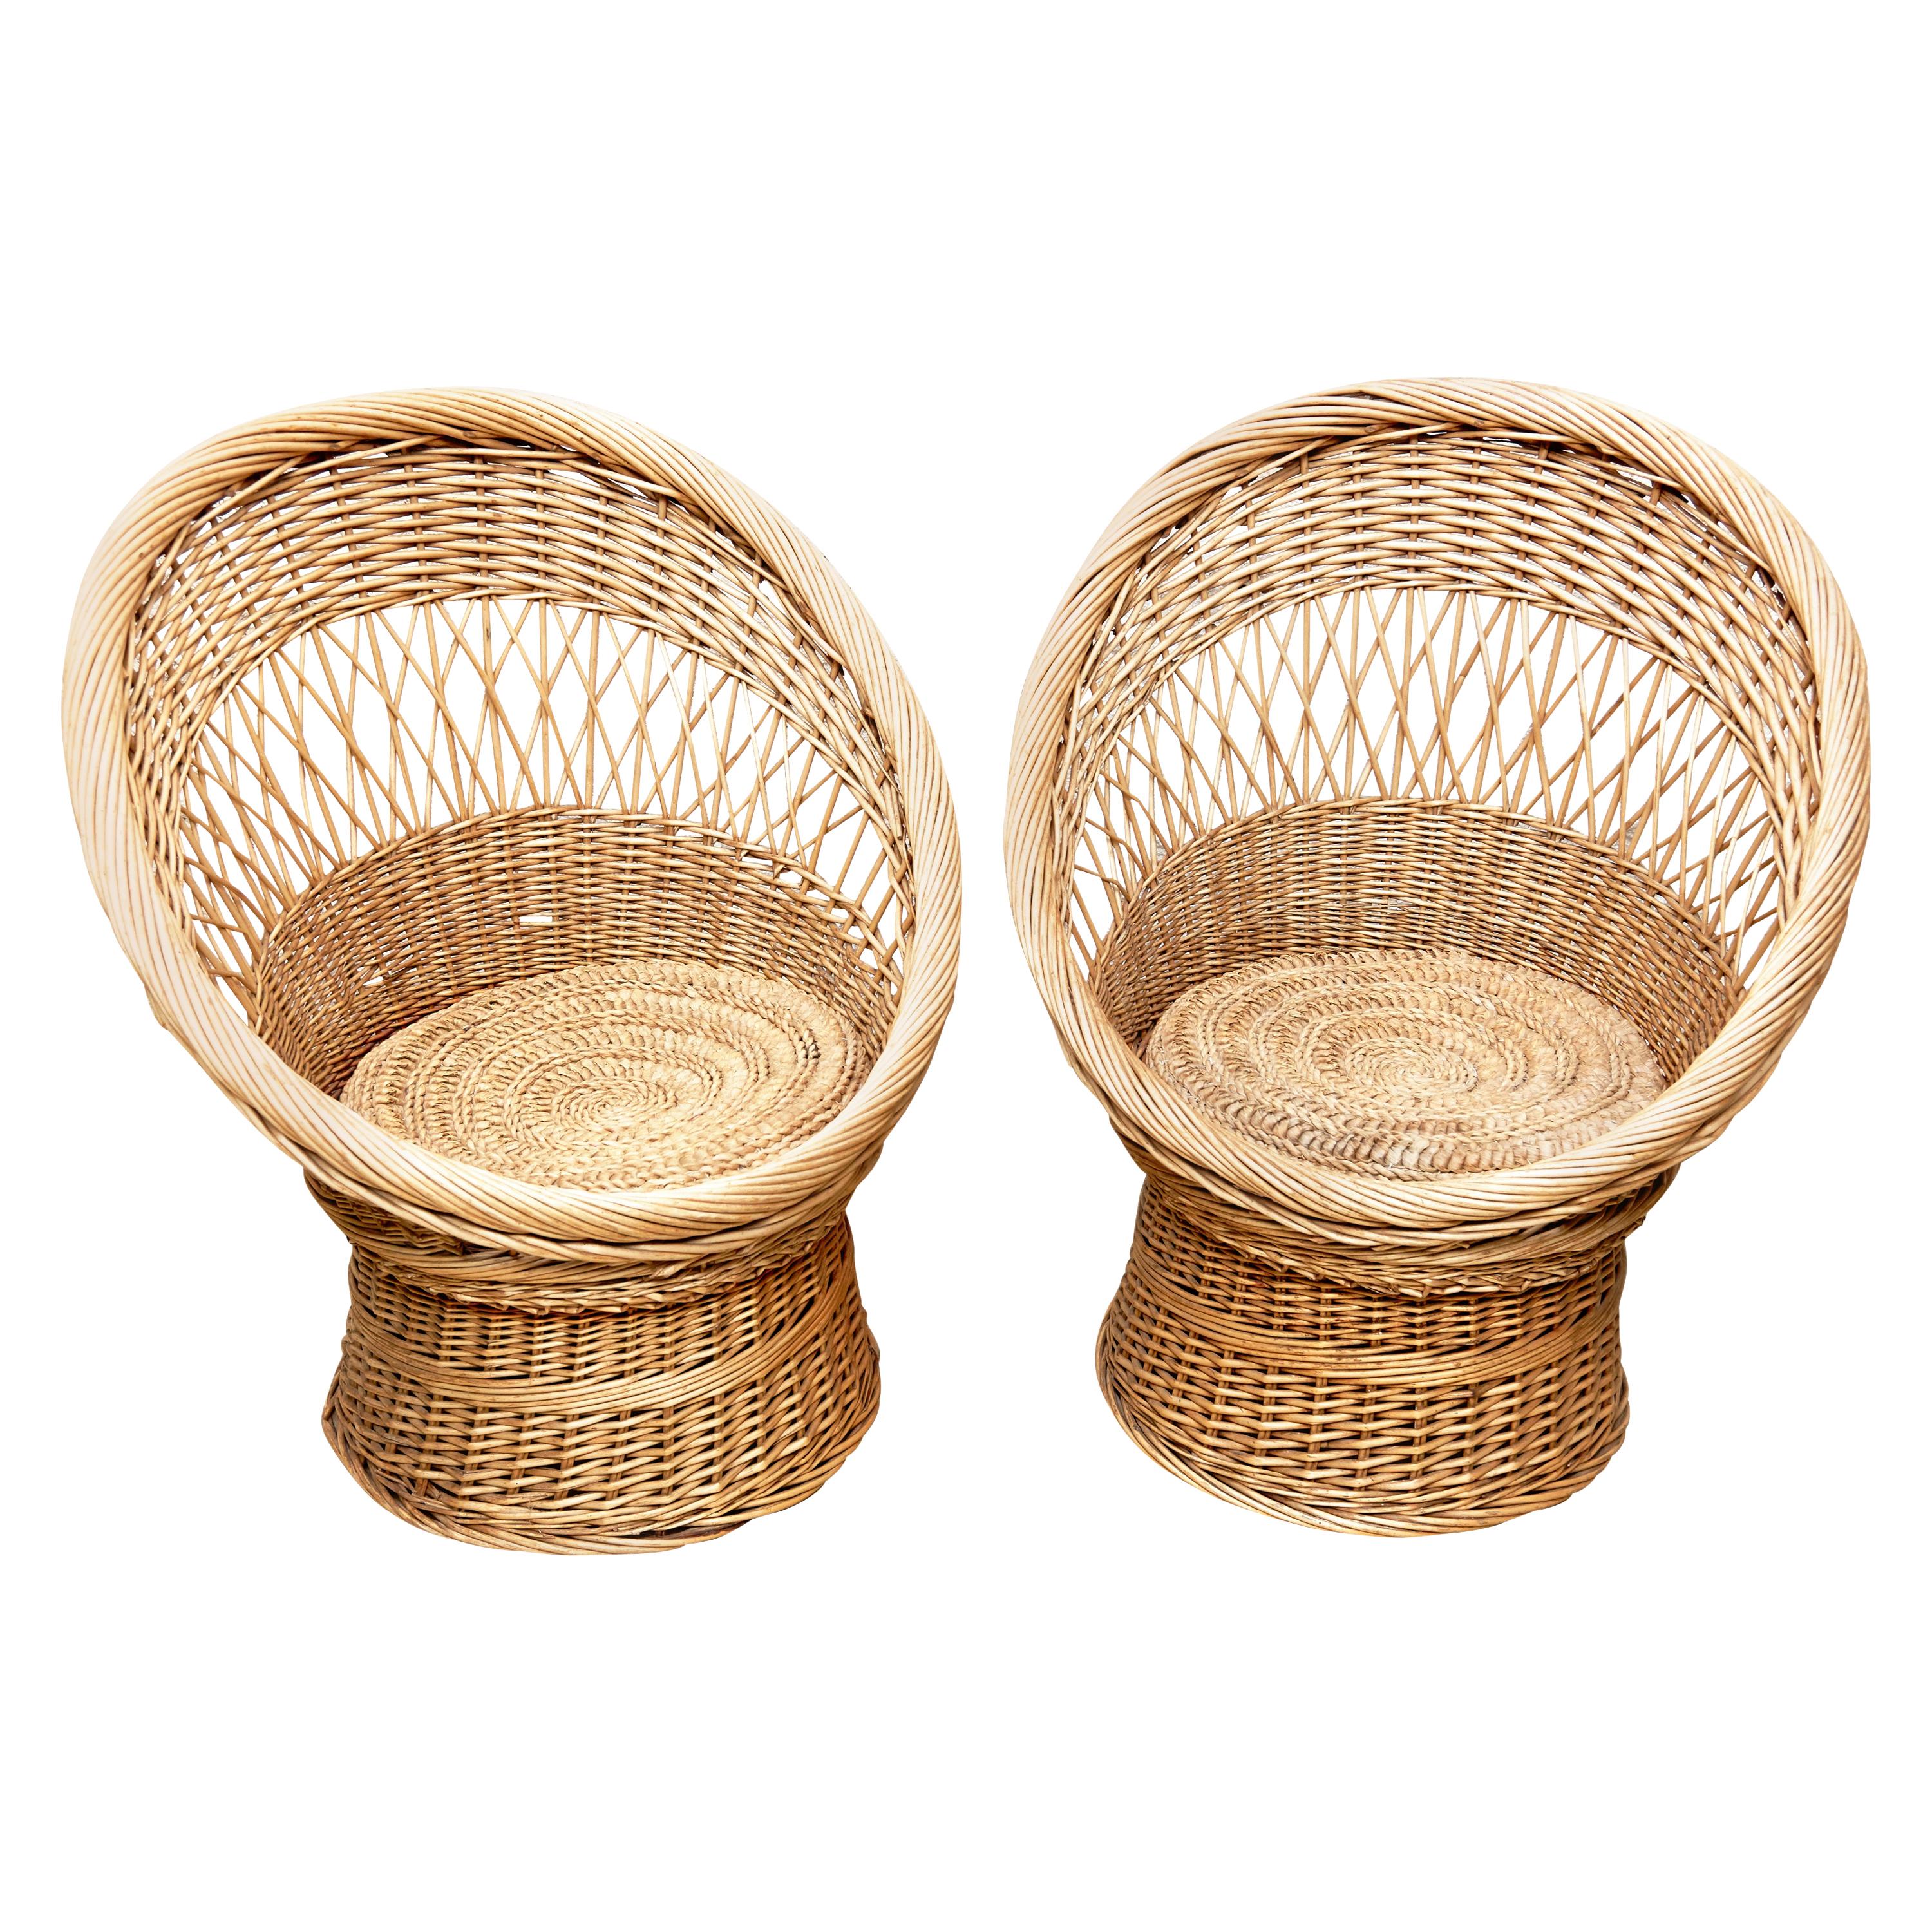 Pair of French Rattan Egg Mid-Century Modern Easychairs, circa 1960